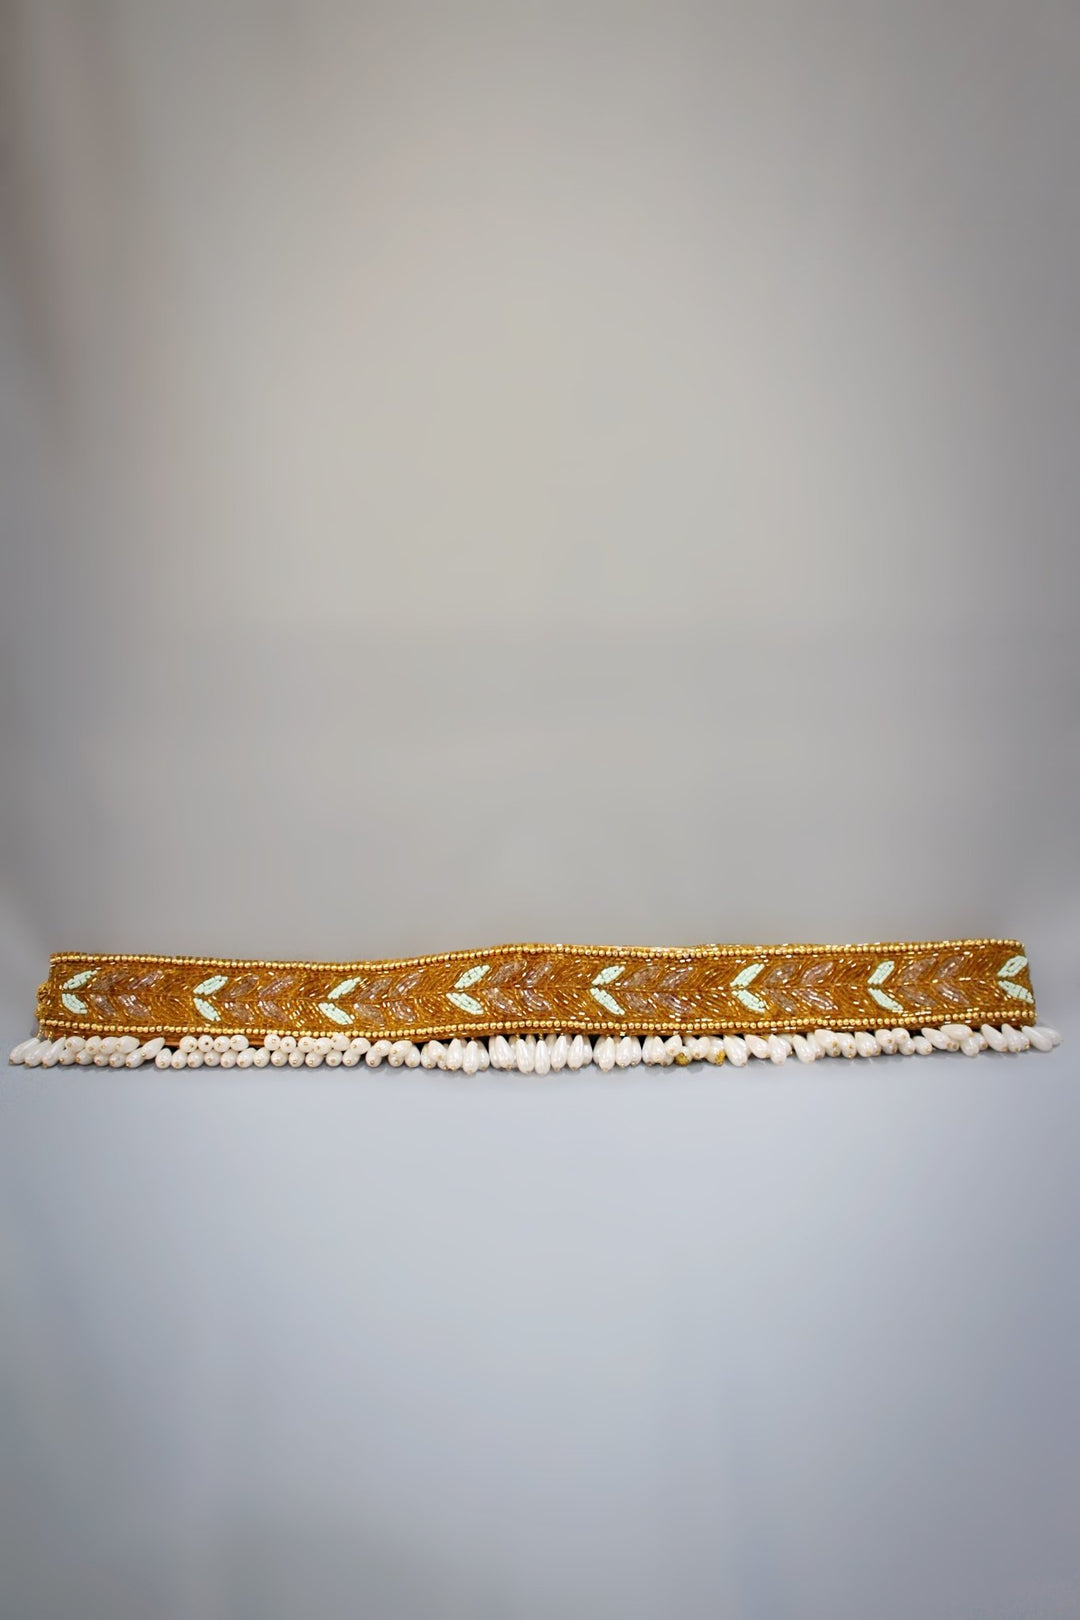 embroidered belt - embroidery belt for saree